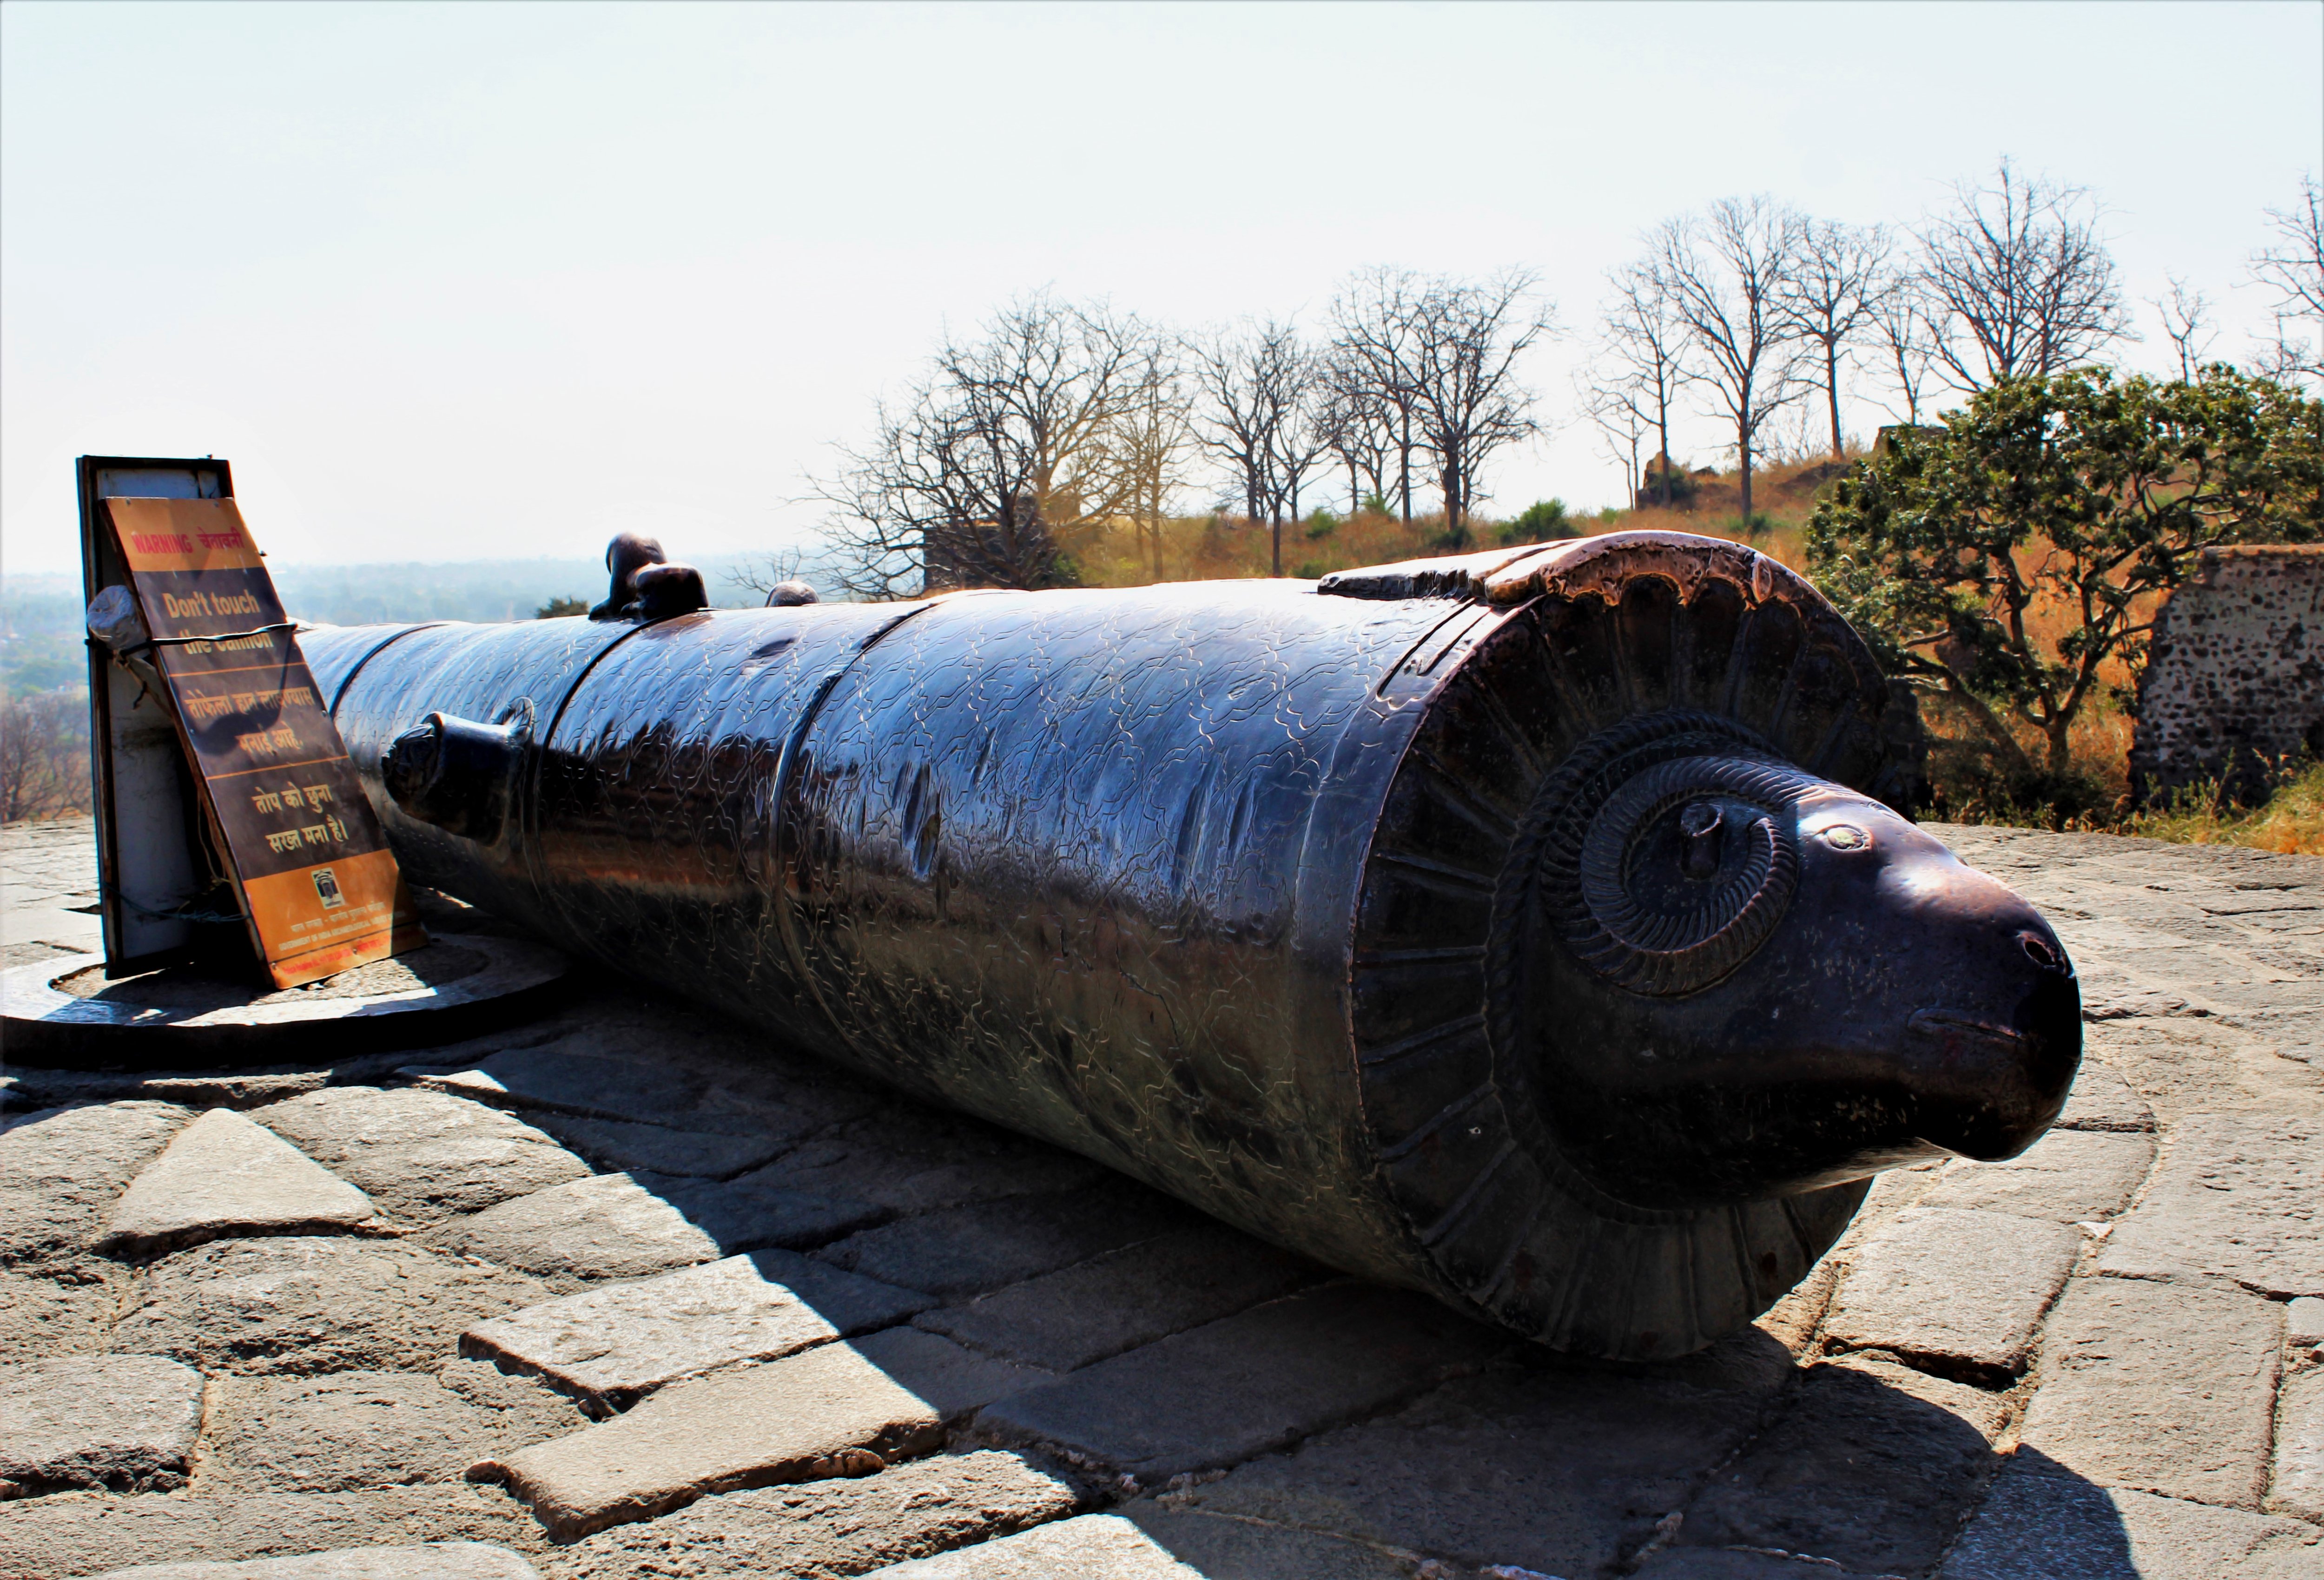 The Mendha Cannon